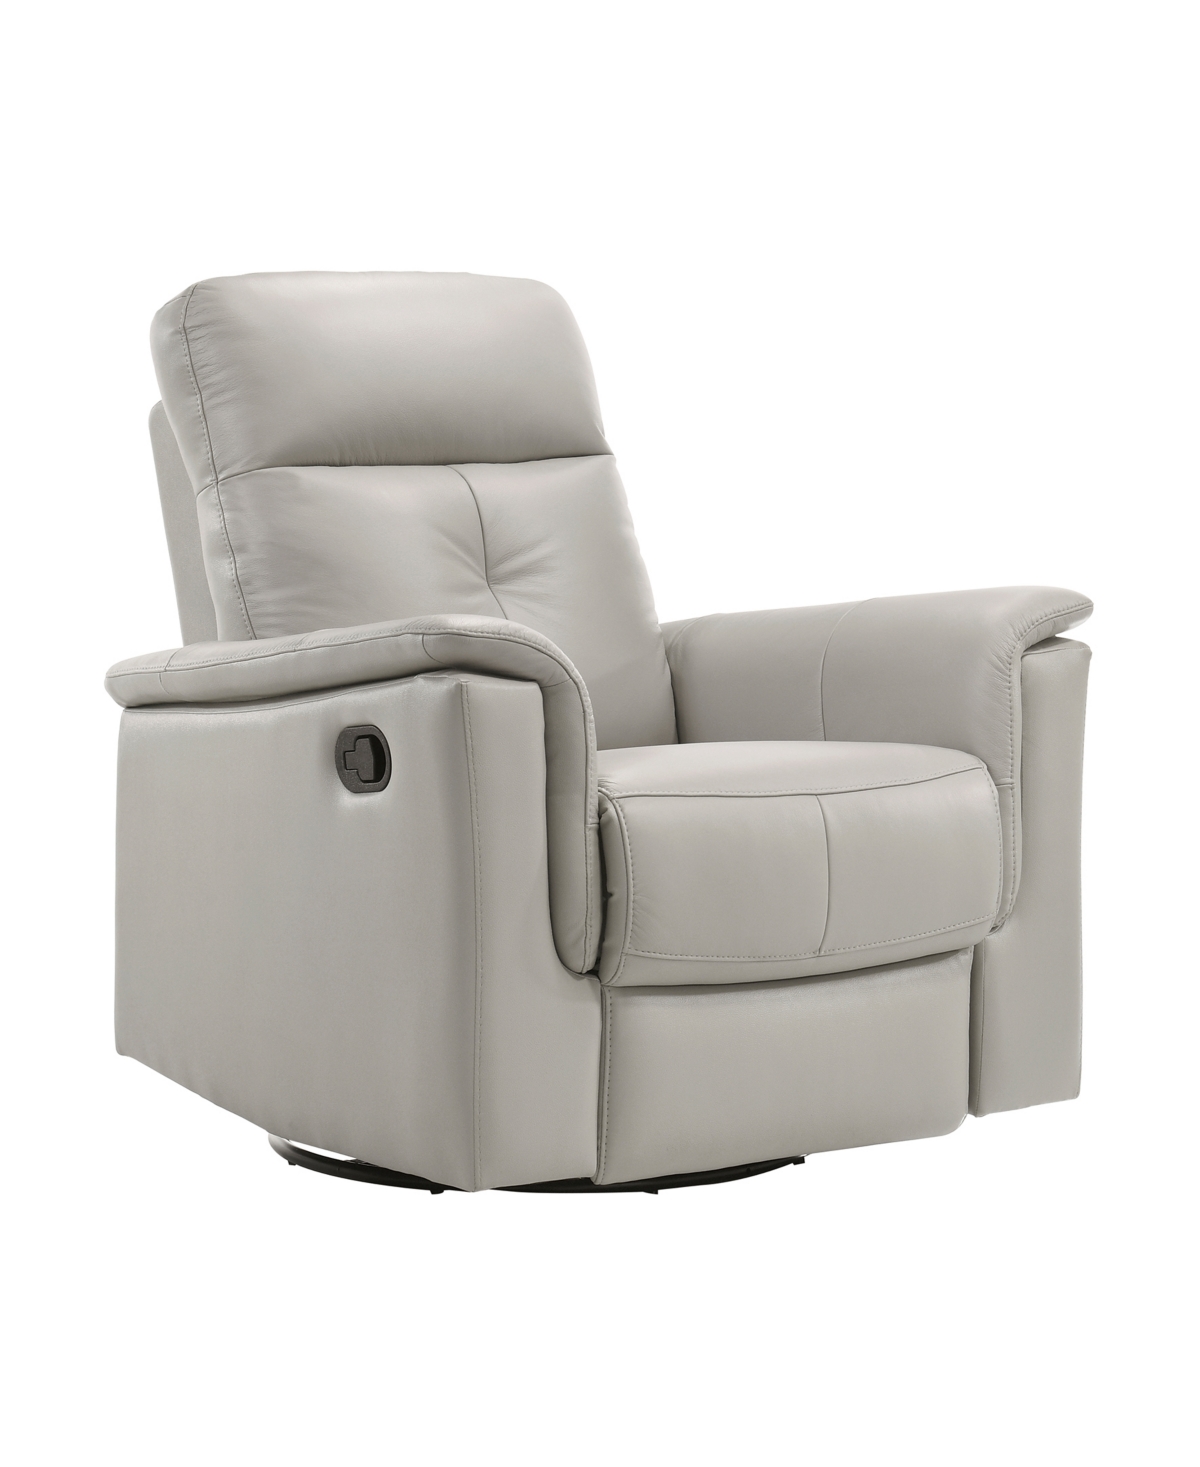 Shop Homelegance Emillia 36" Leather Swivel Glider Reclining Chair In Silver